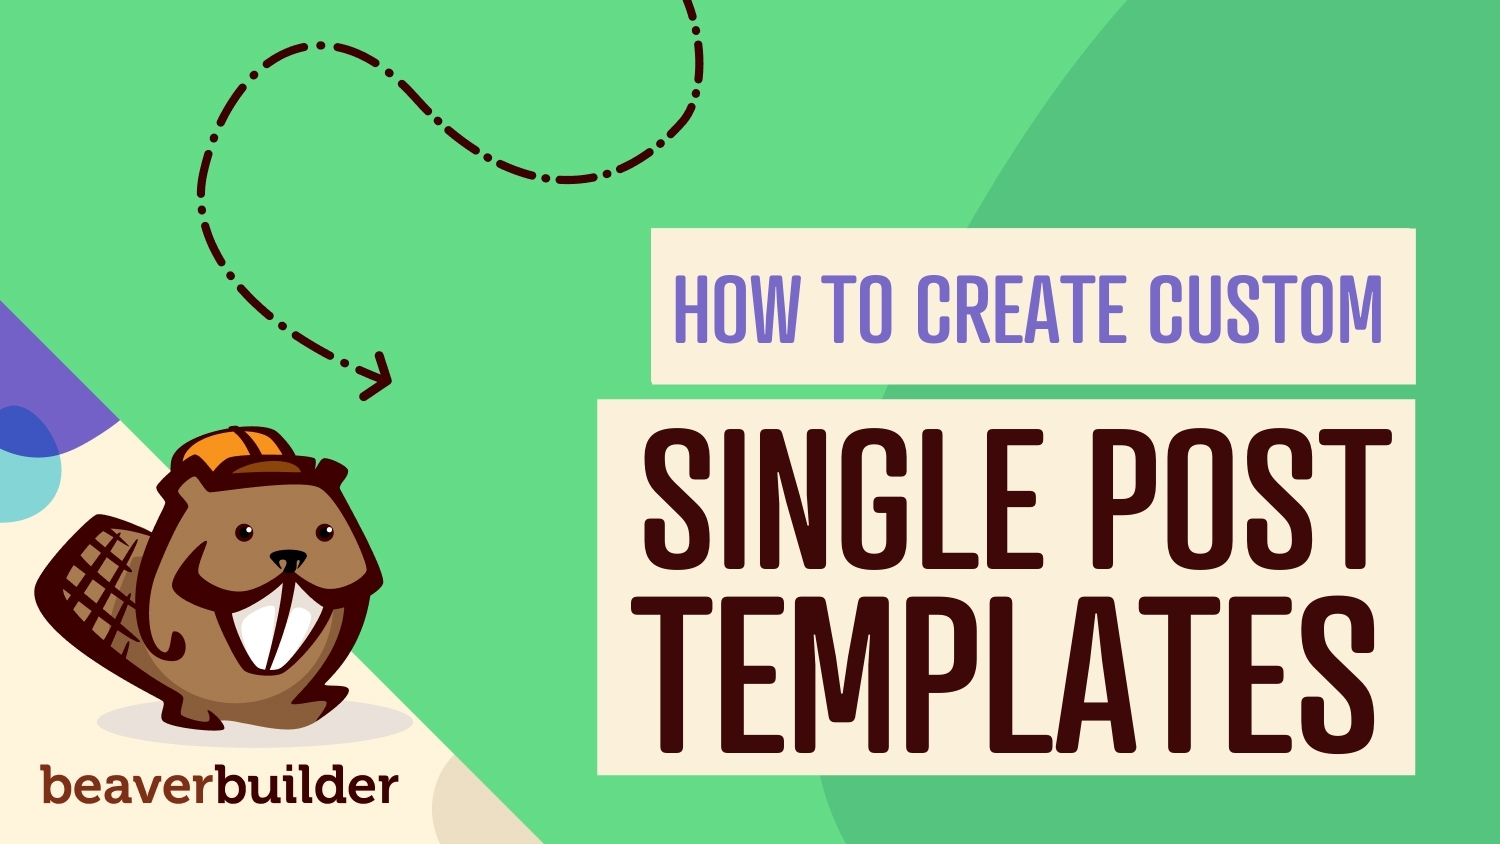 How to create custome single post templates using Beaver Builder